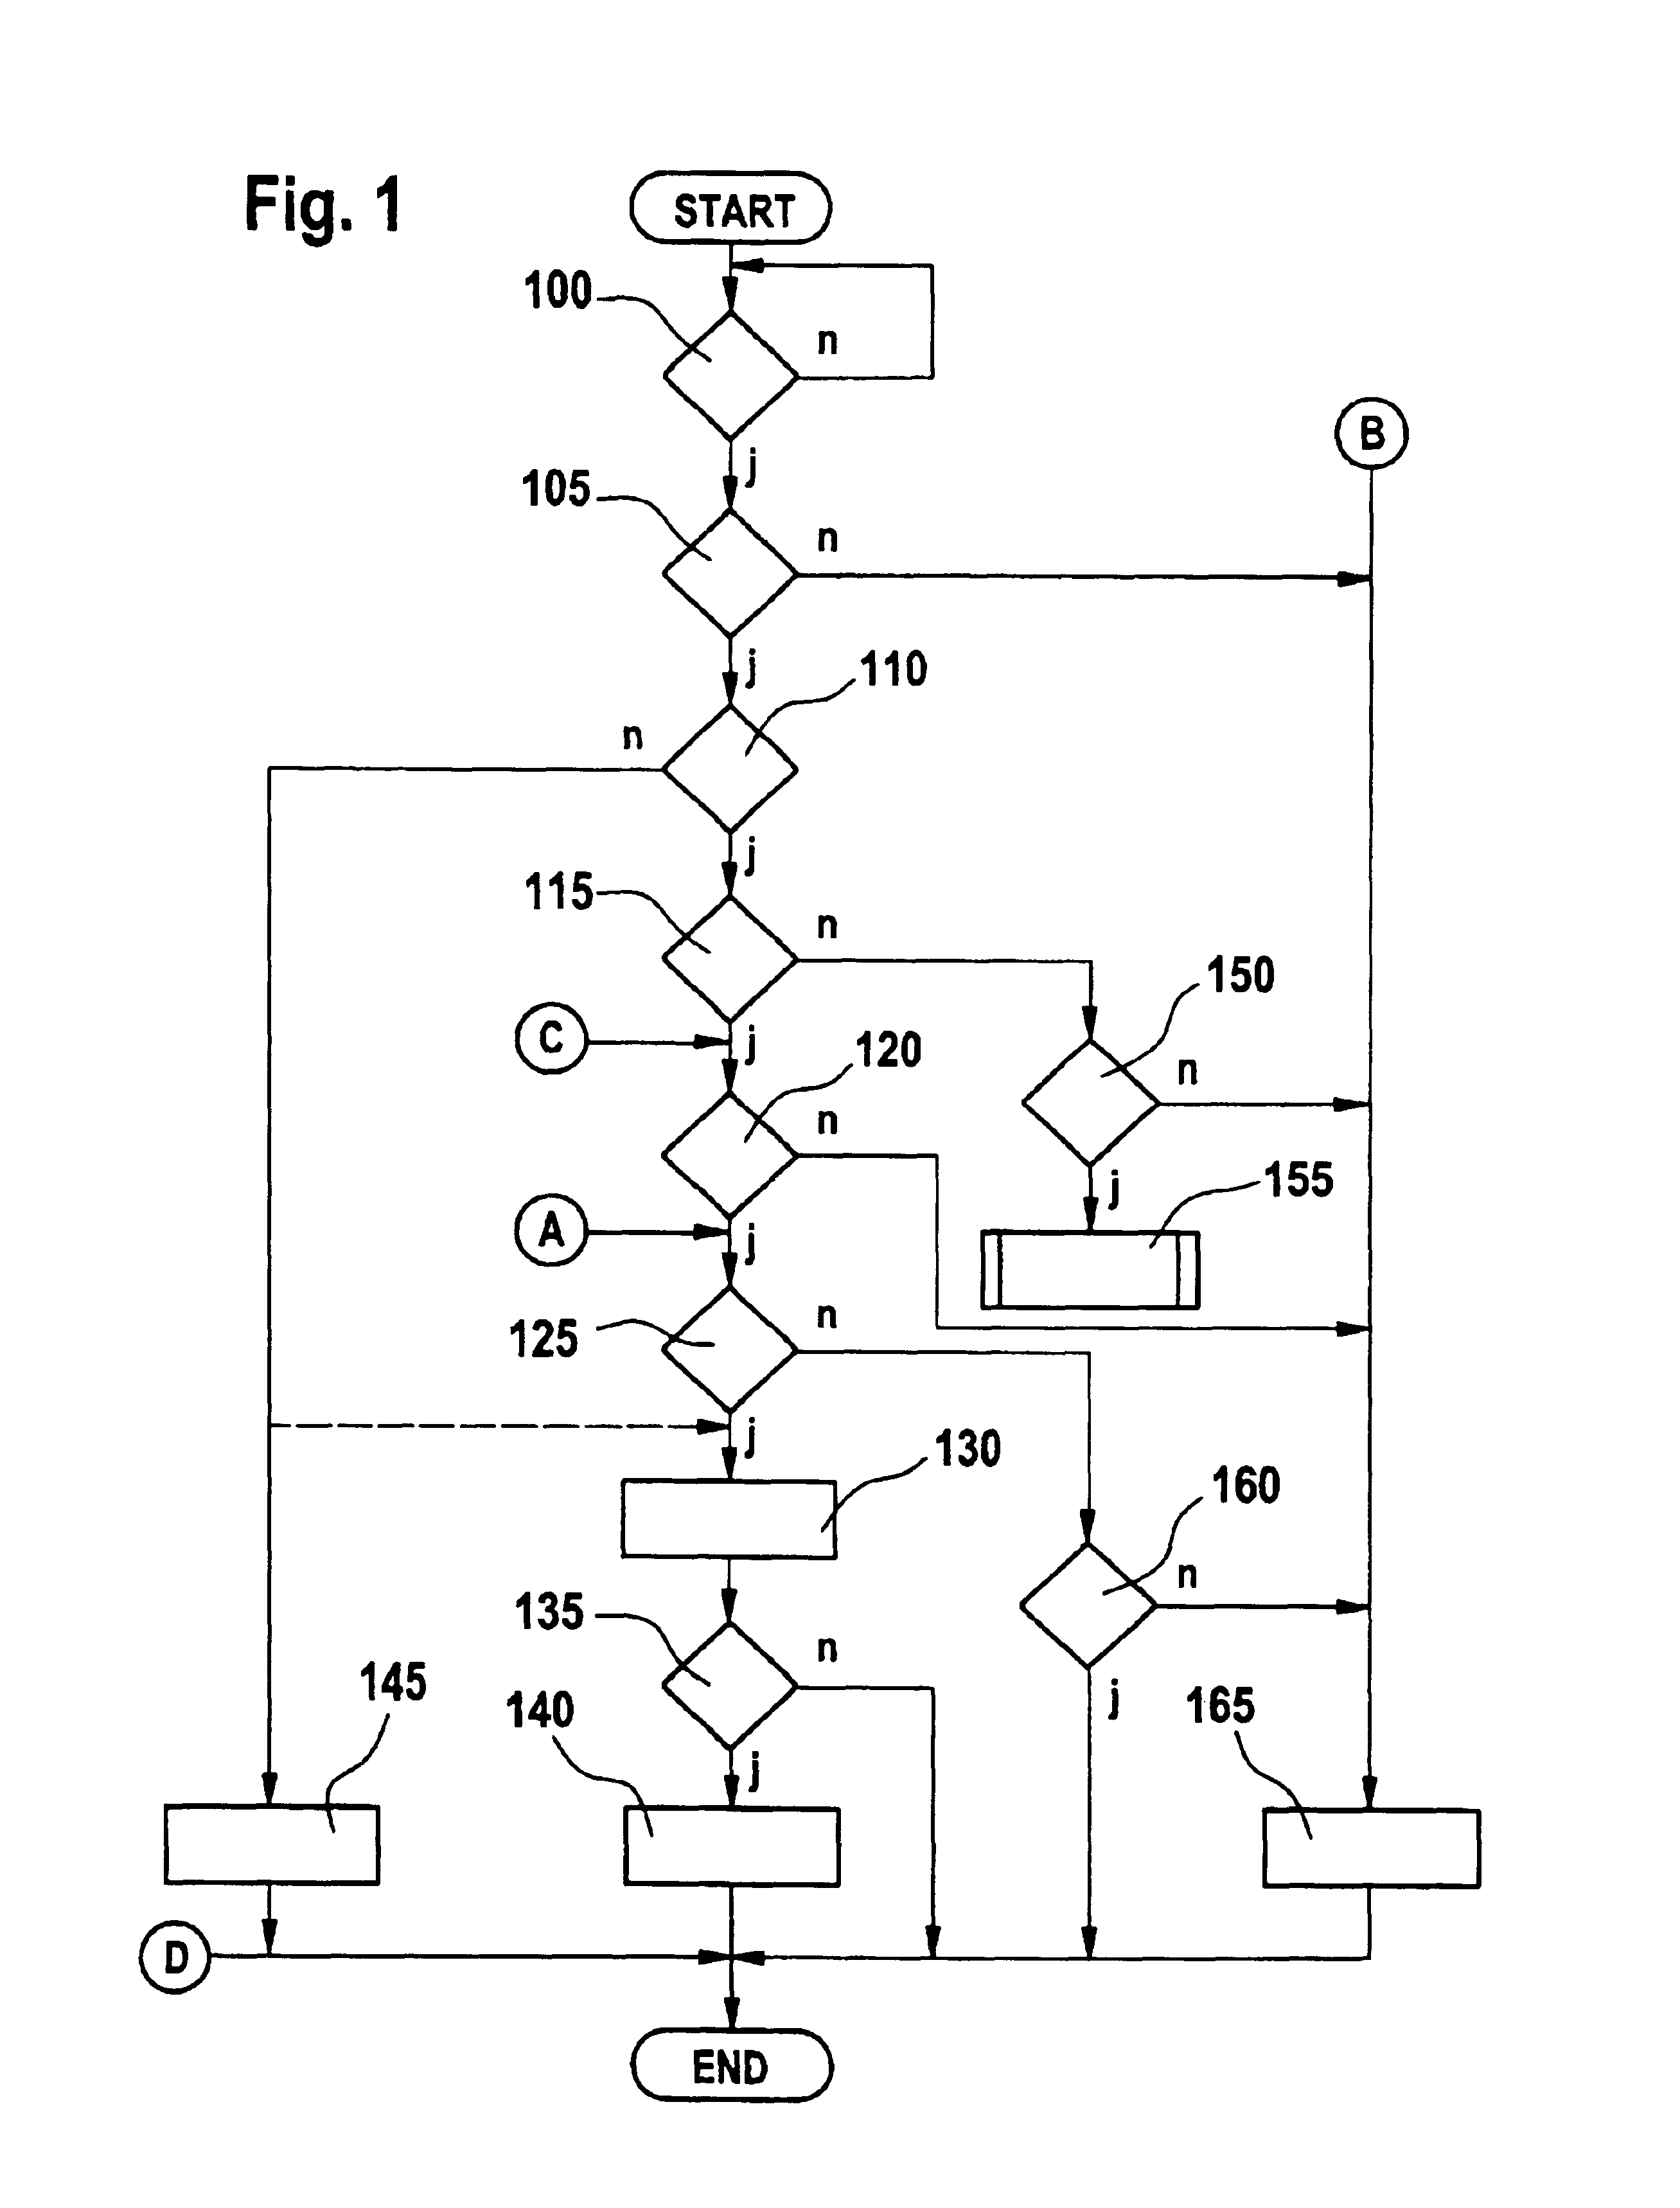 Method and device for controlling the drive unit of a vehicle